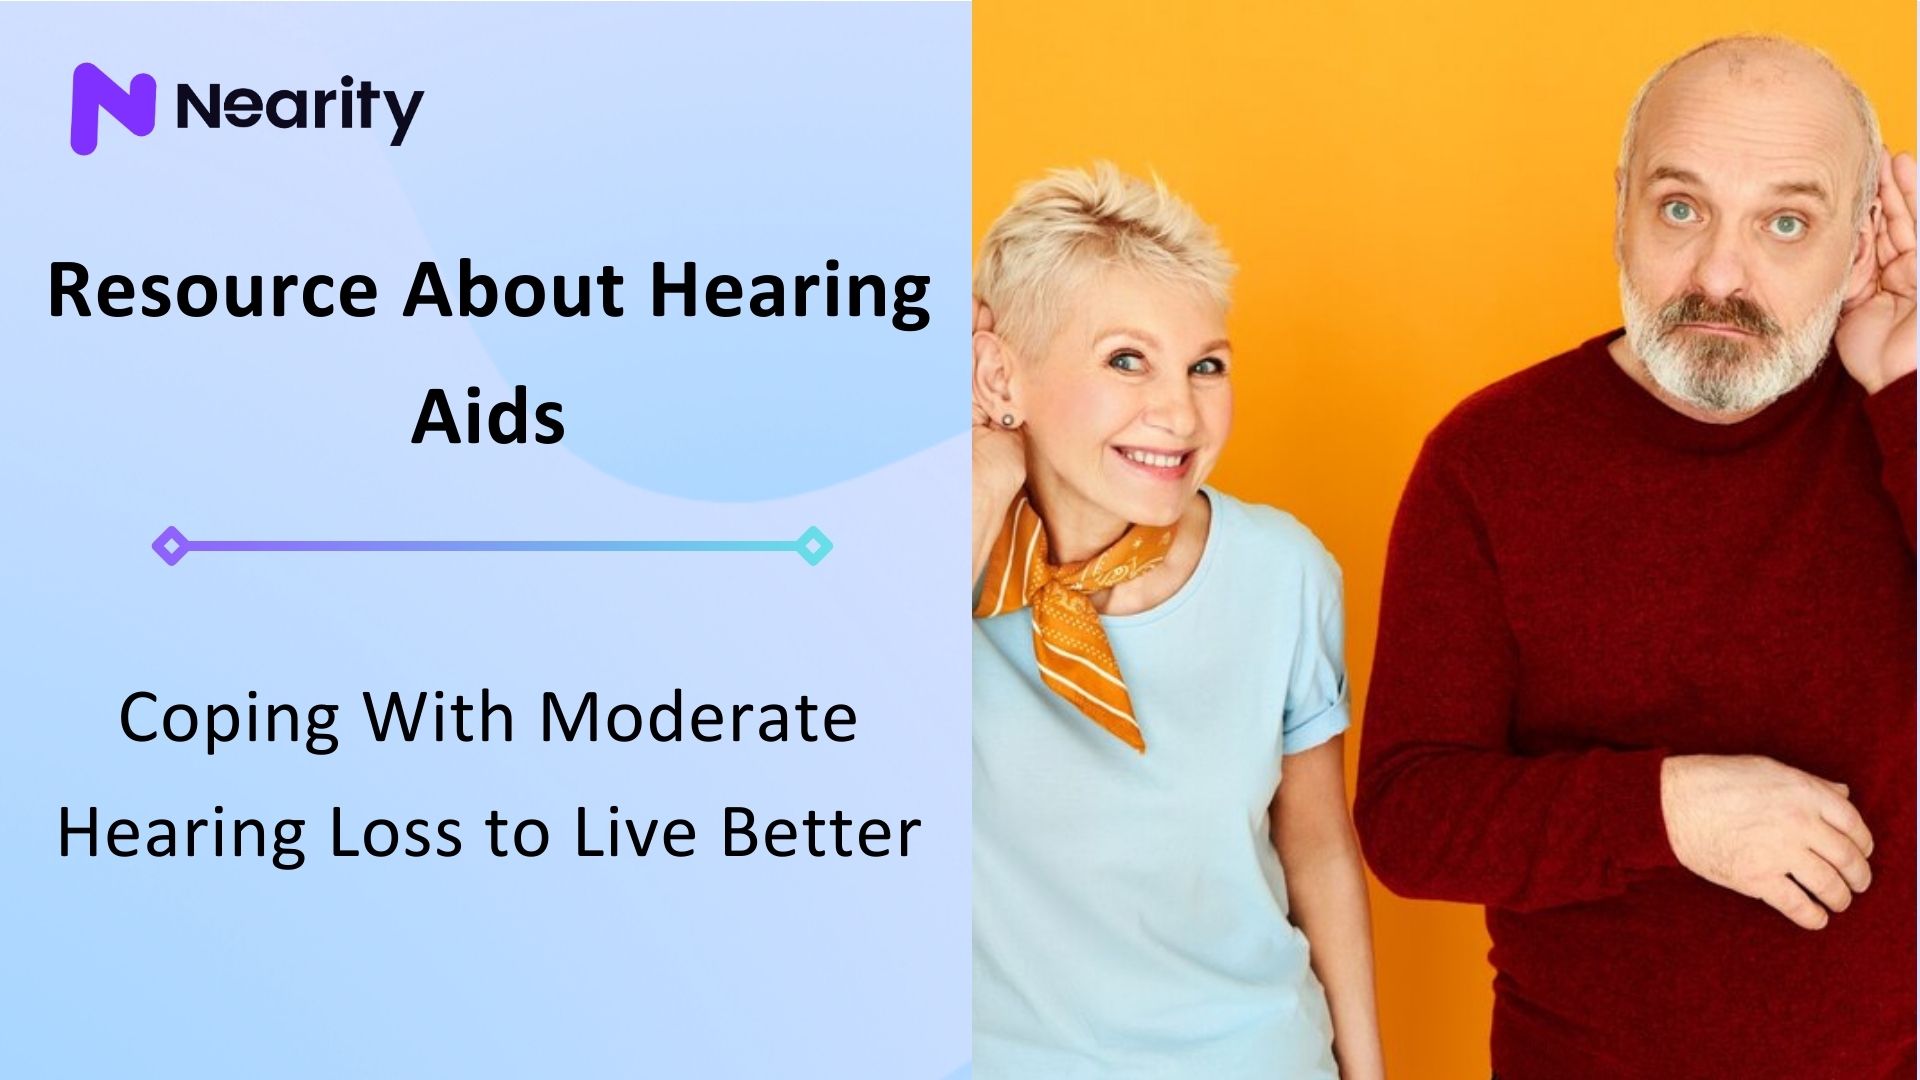 Coping With Moderate Hearing Loss to Live Better